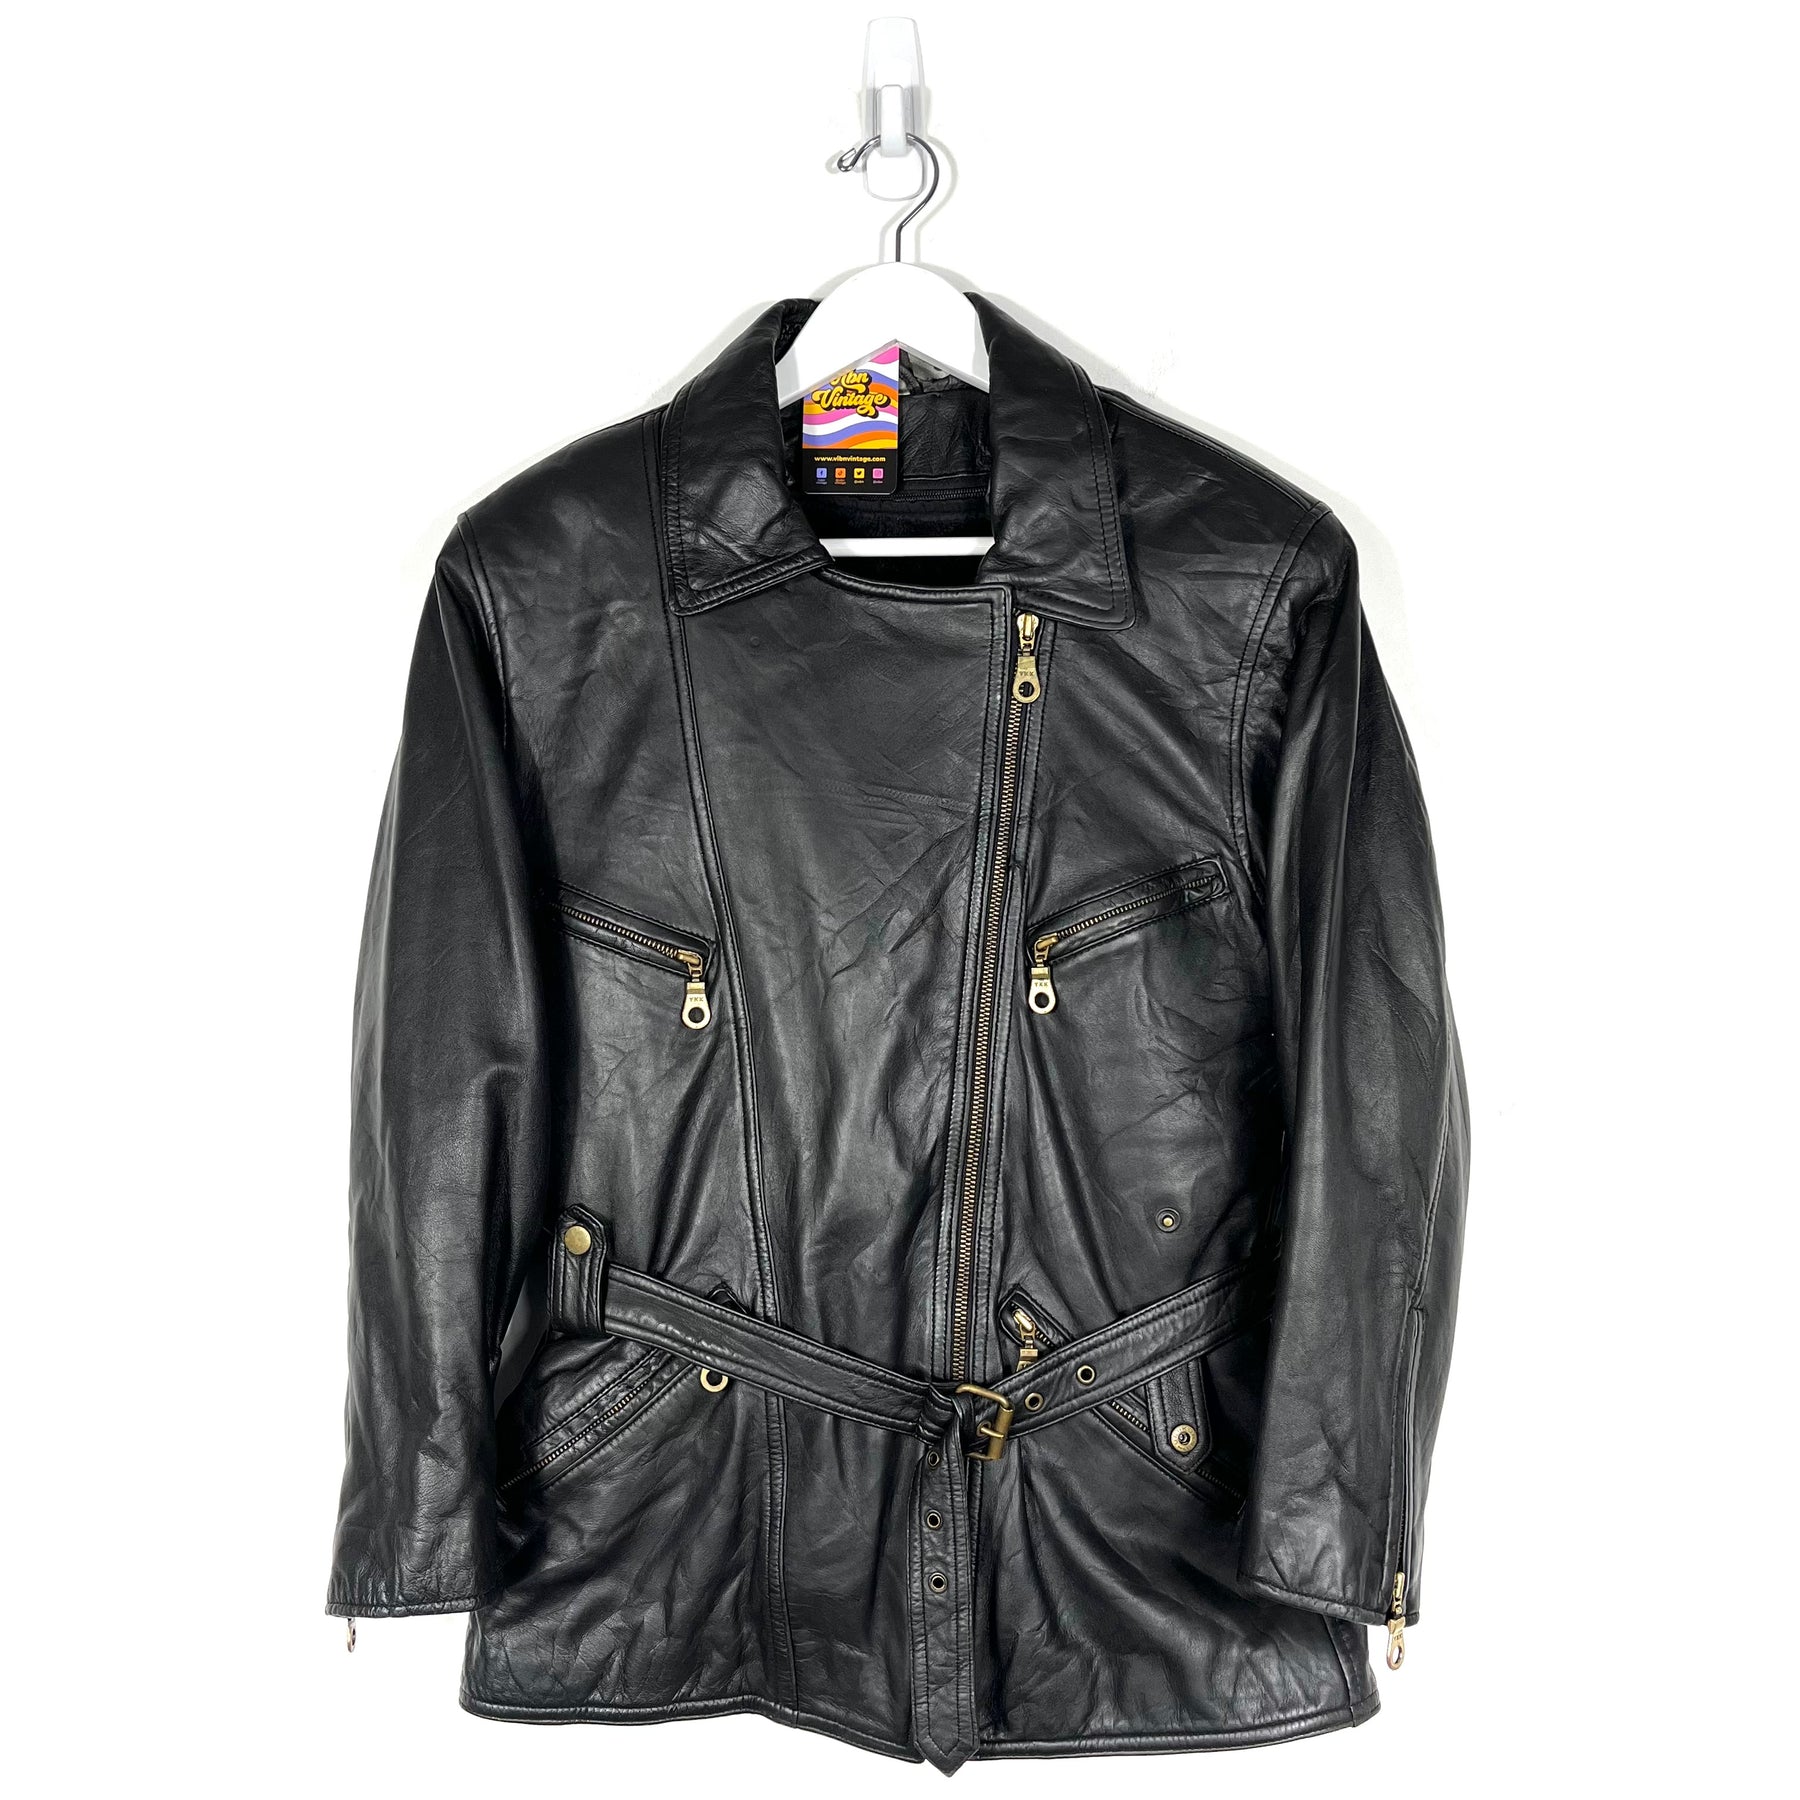 Vintage Leather Jacket - Women's Small